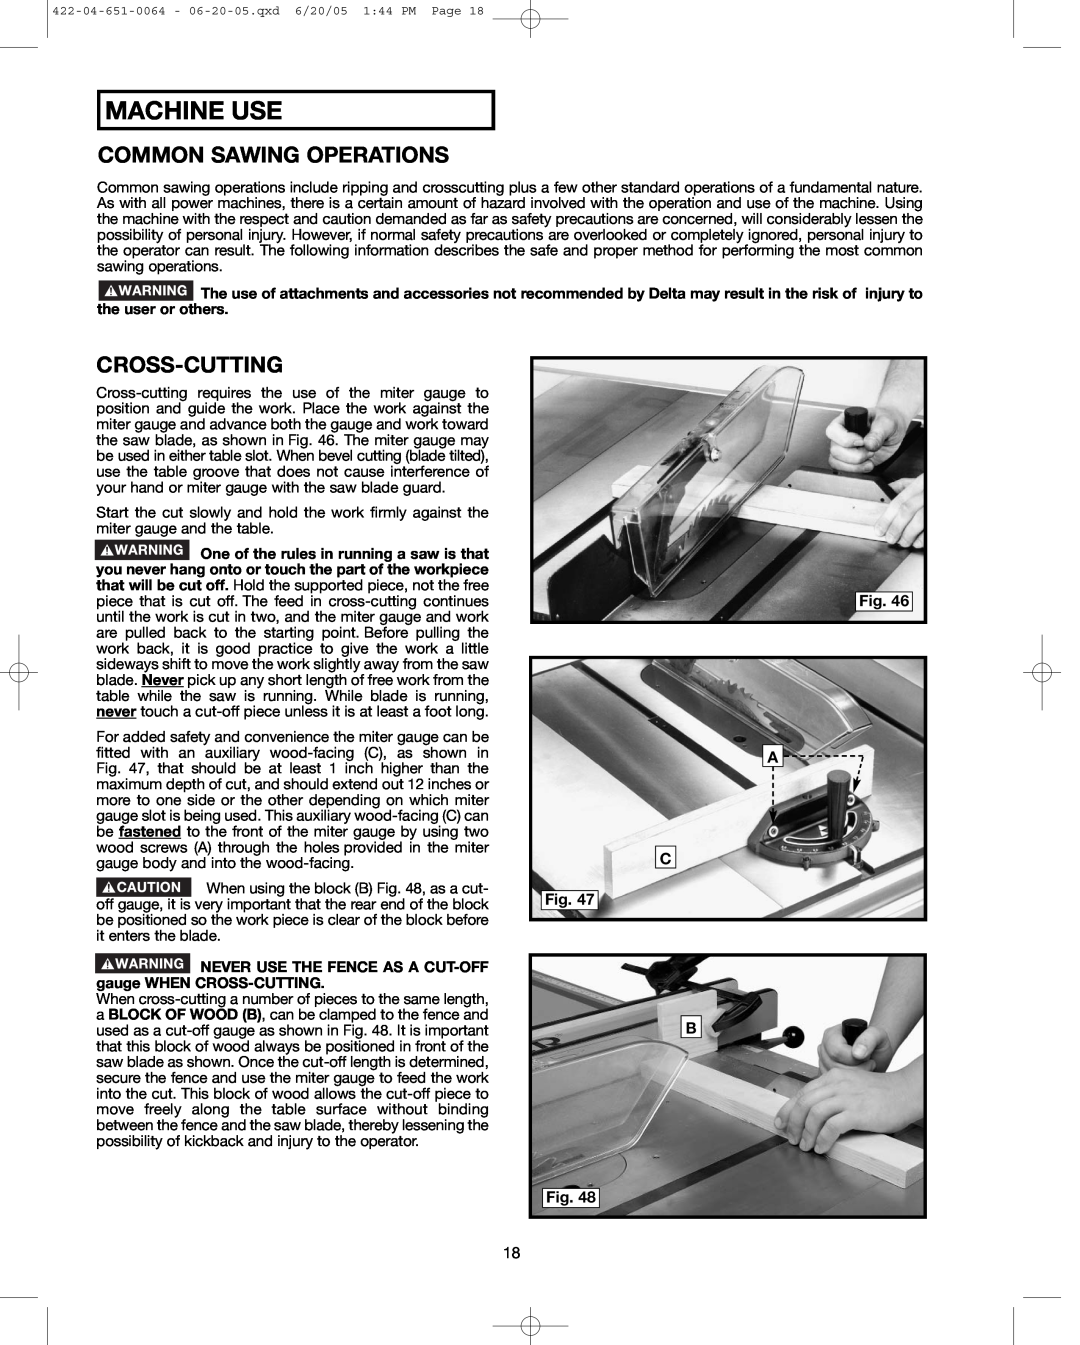 Delta 34-814, 34-806, 34-801 instruction manual Machine Use, Common Sawing Operations, Cross-Cutting 